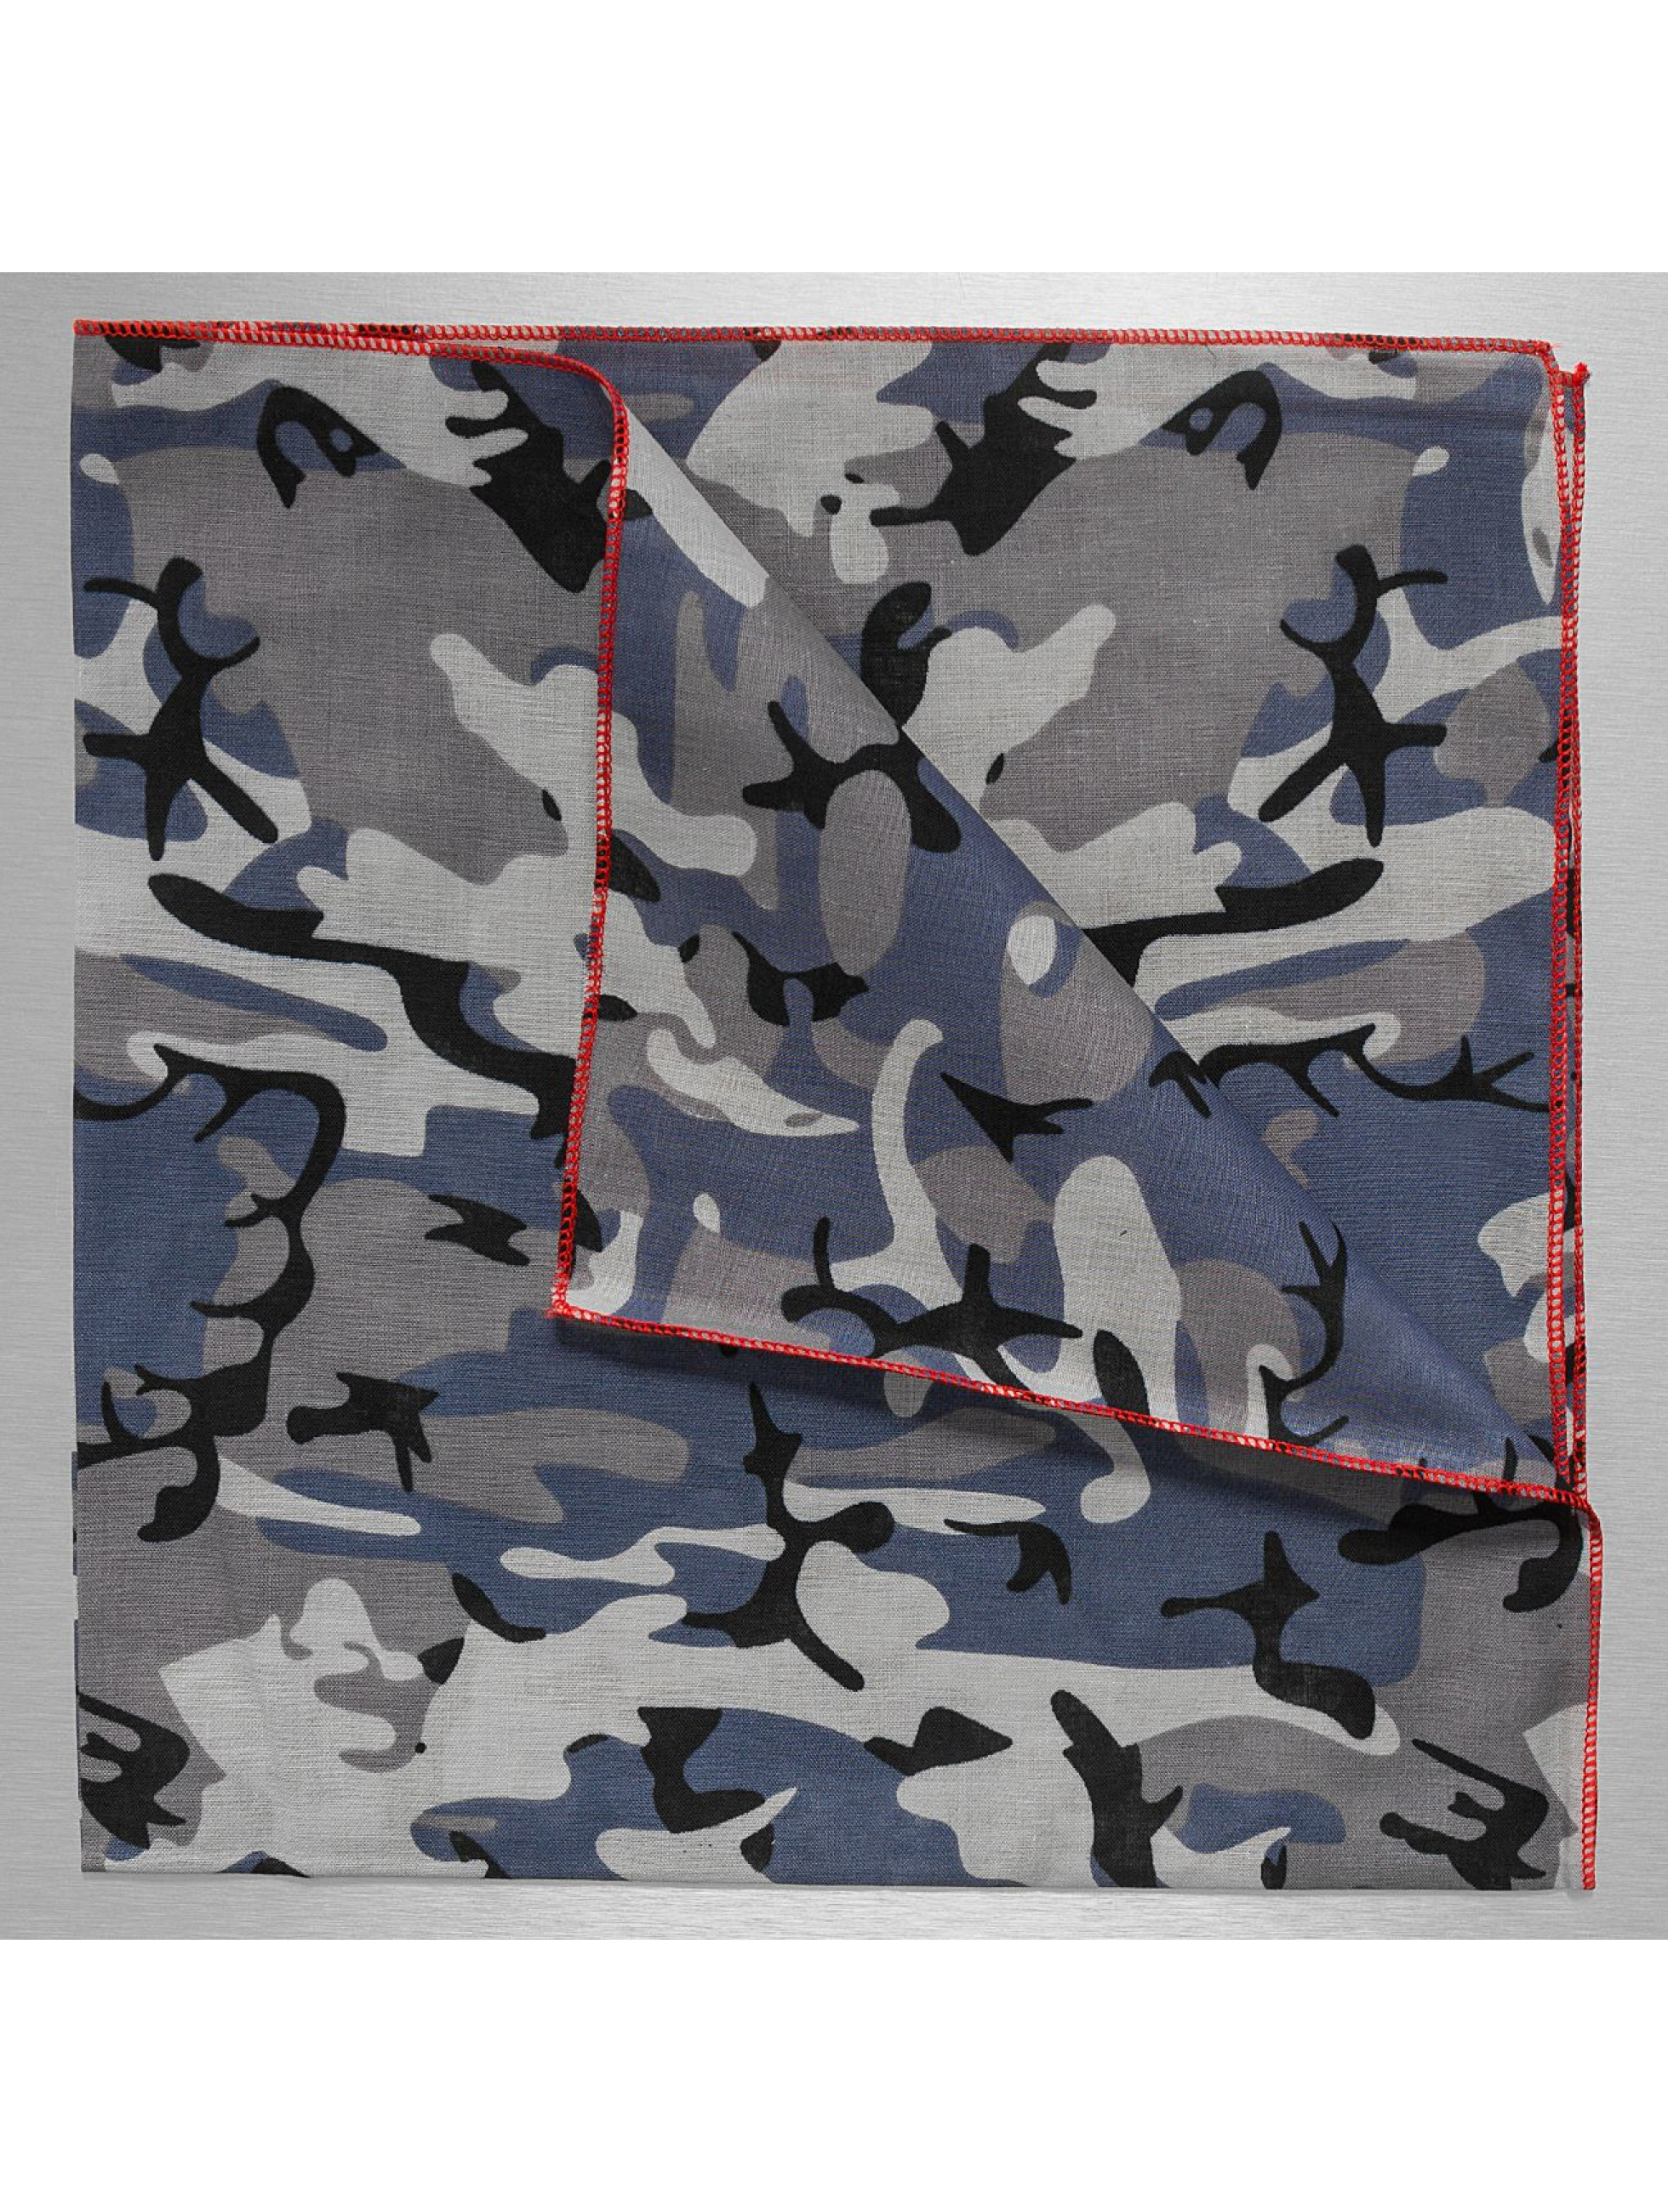 Bandana Special Print in camouflage